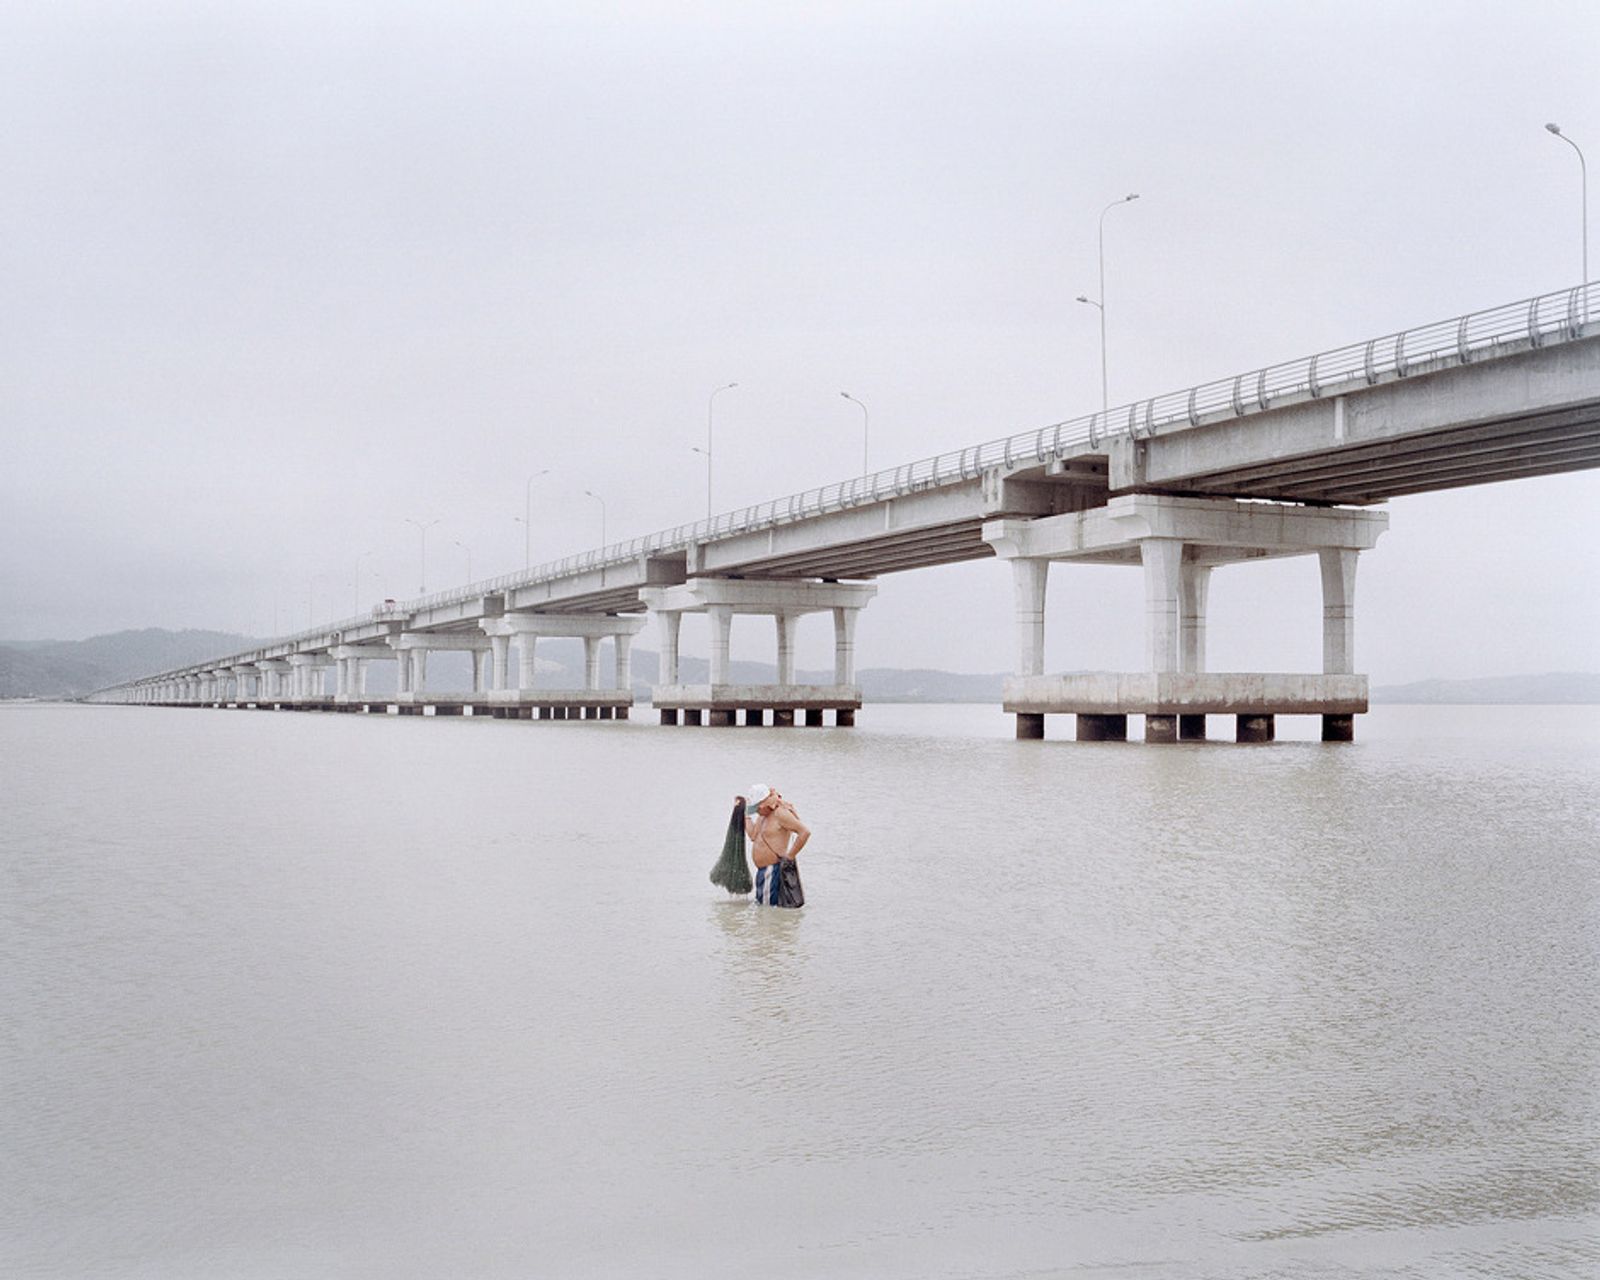 © Pietro Paolini - A shrimp fisherman under the new bridge built by the government of the Bay of Caraquez. October 2012